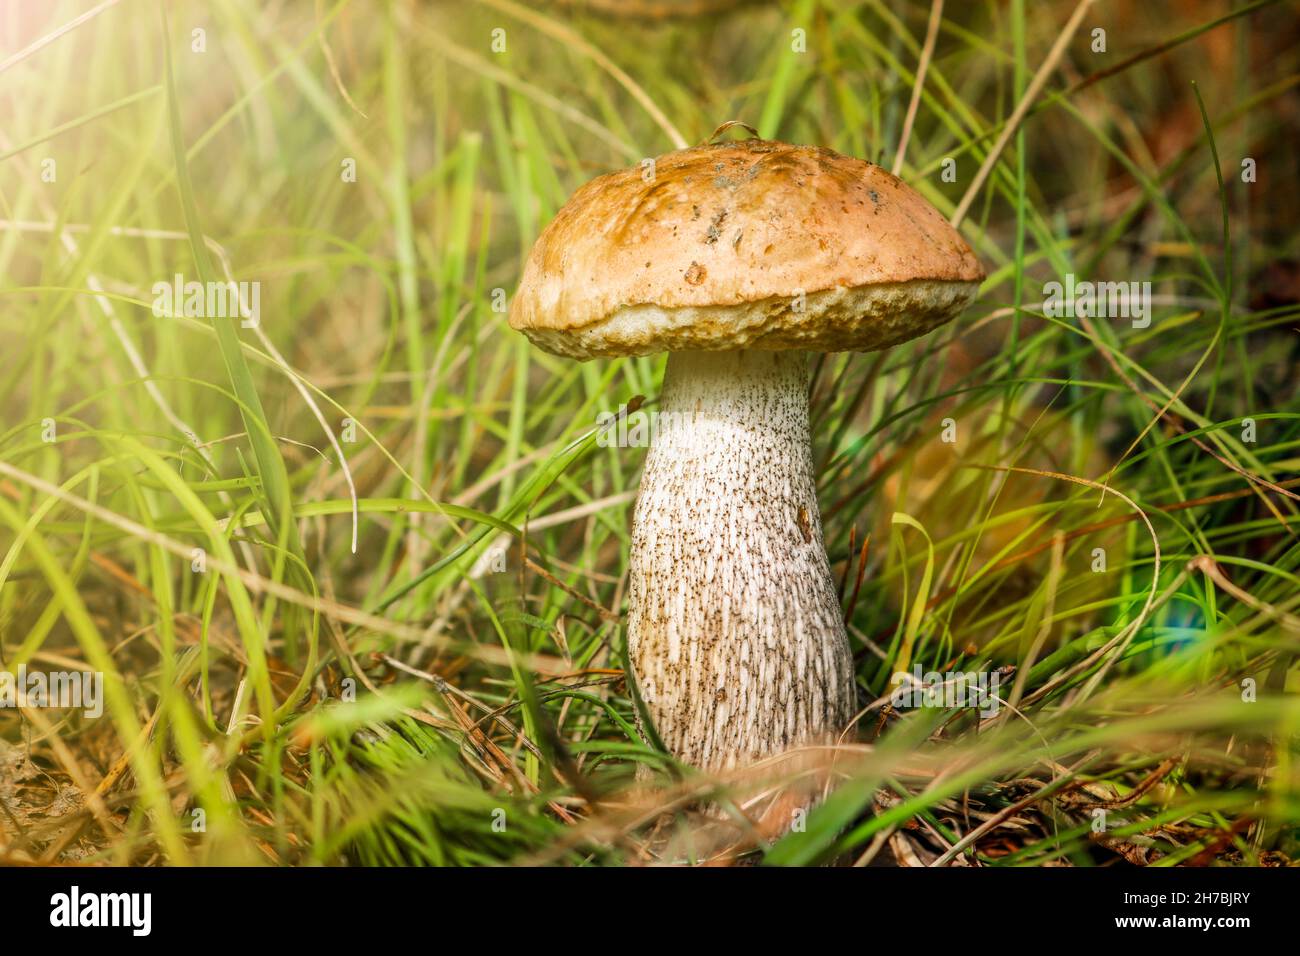 Luxurious young boletus mushroom (Leccinum scabrum) in the grass low angle view. Birch bolete with a brown cap is an edible mushroom. Stock Photo